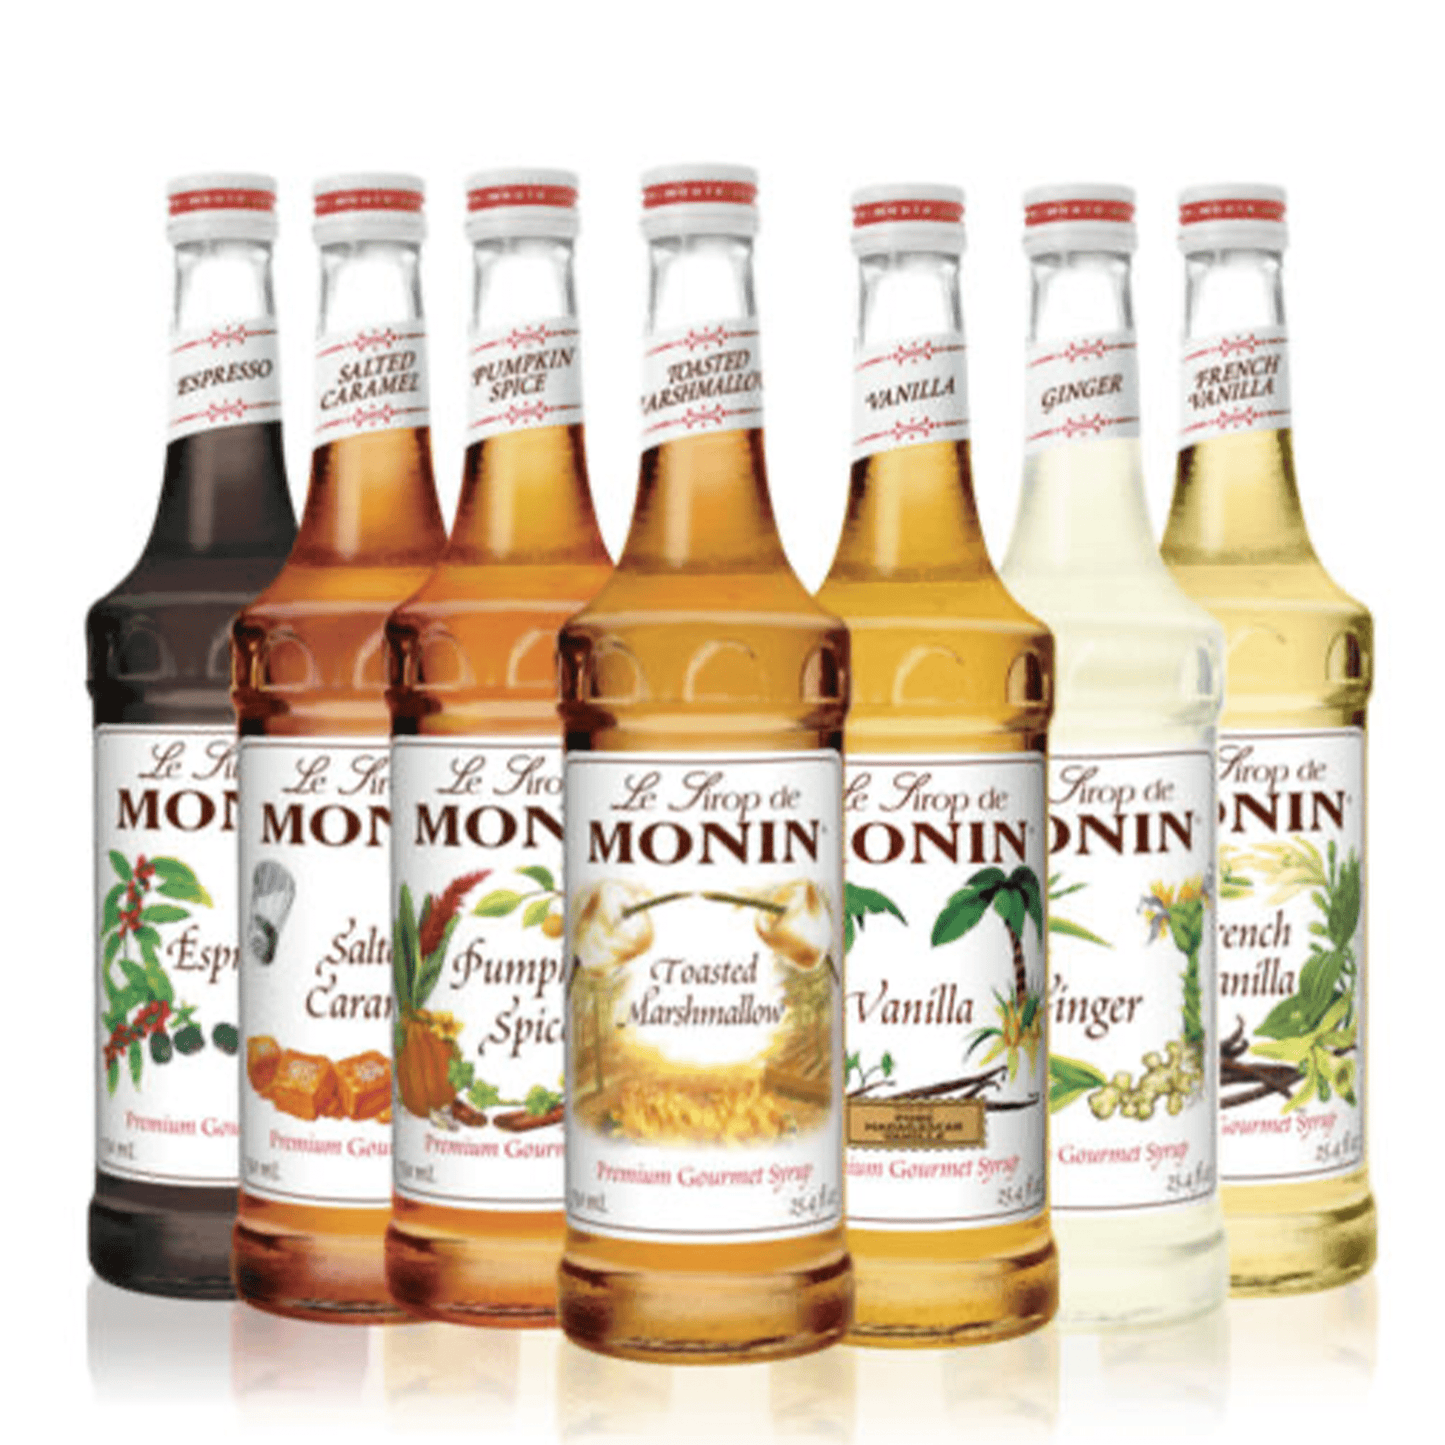 monin syrups case of 12 flavors, build your own